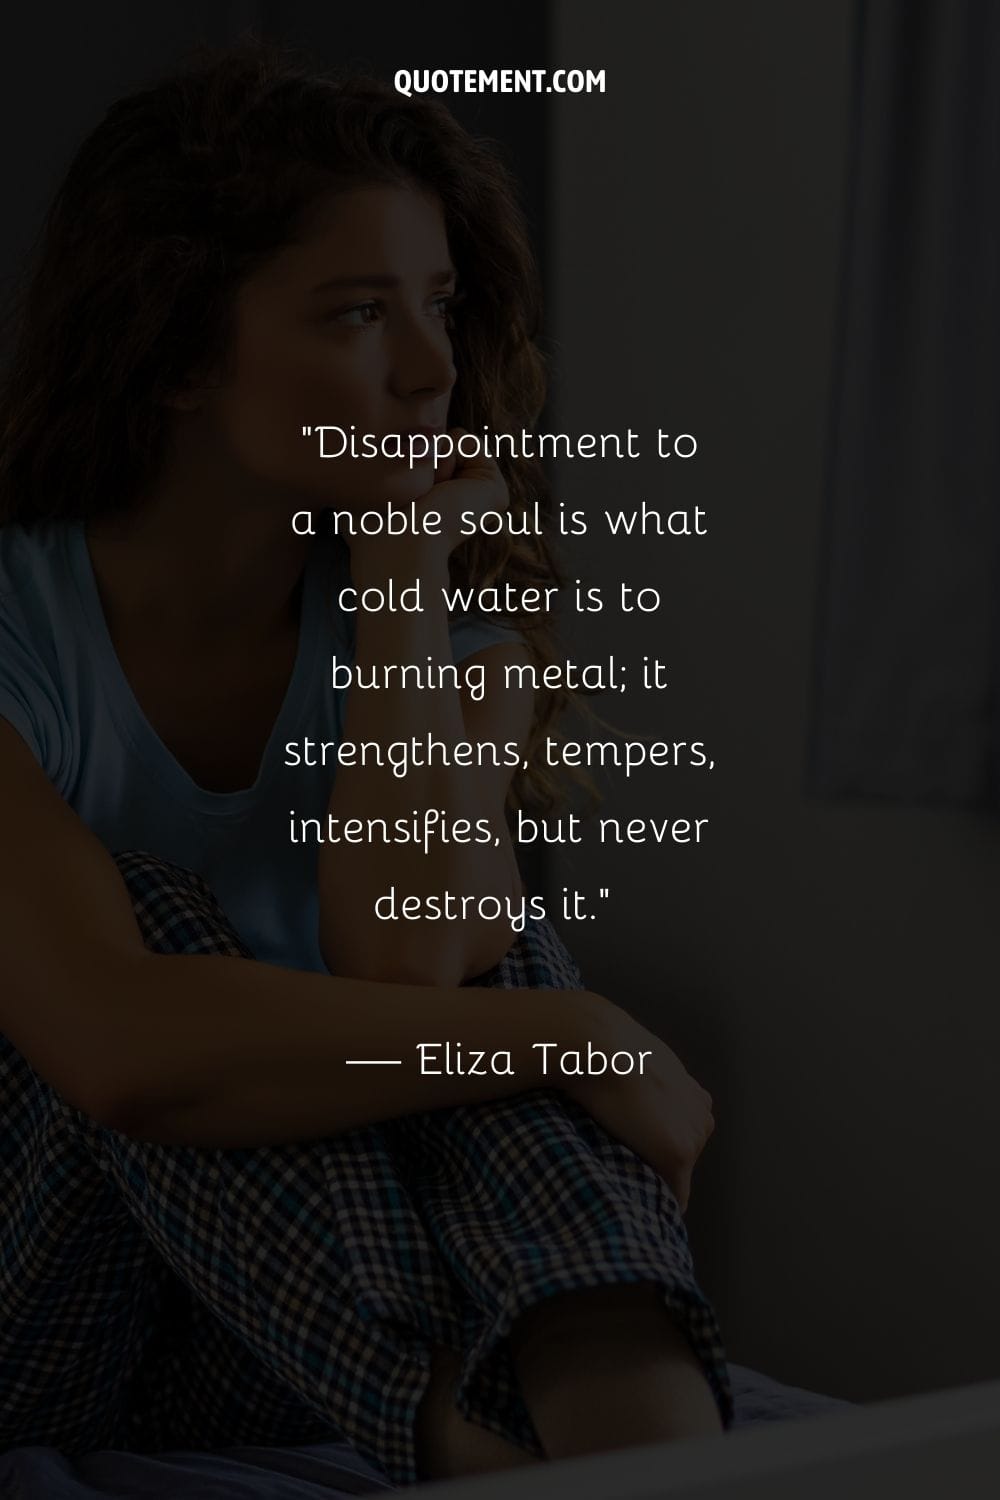 Disappointment to a noble soul is what cold water is to burning metal; it strengthens, tempers, intensifies, but never destroys it